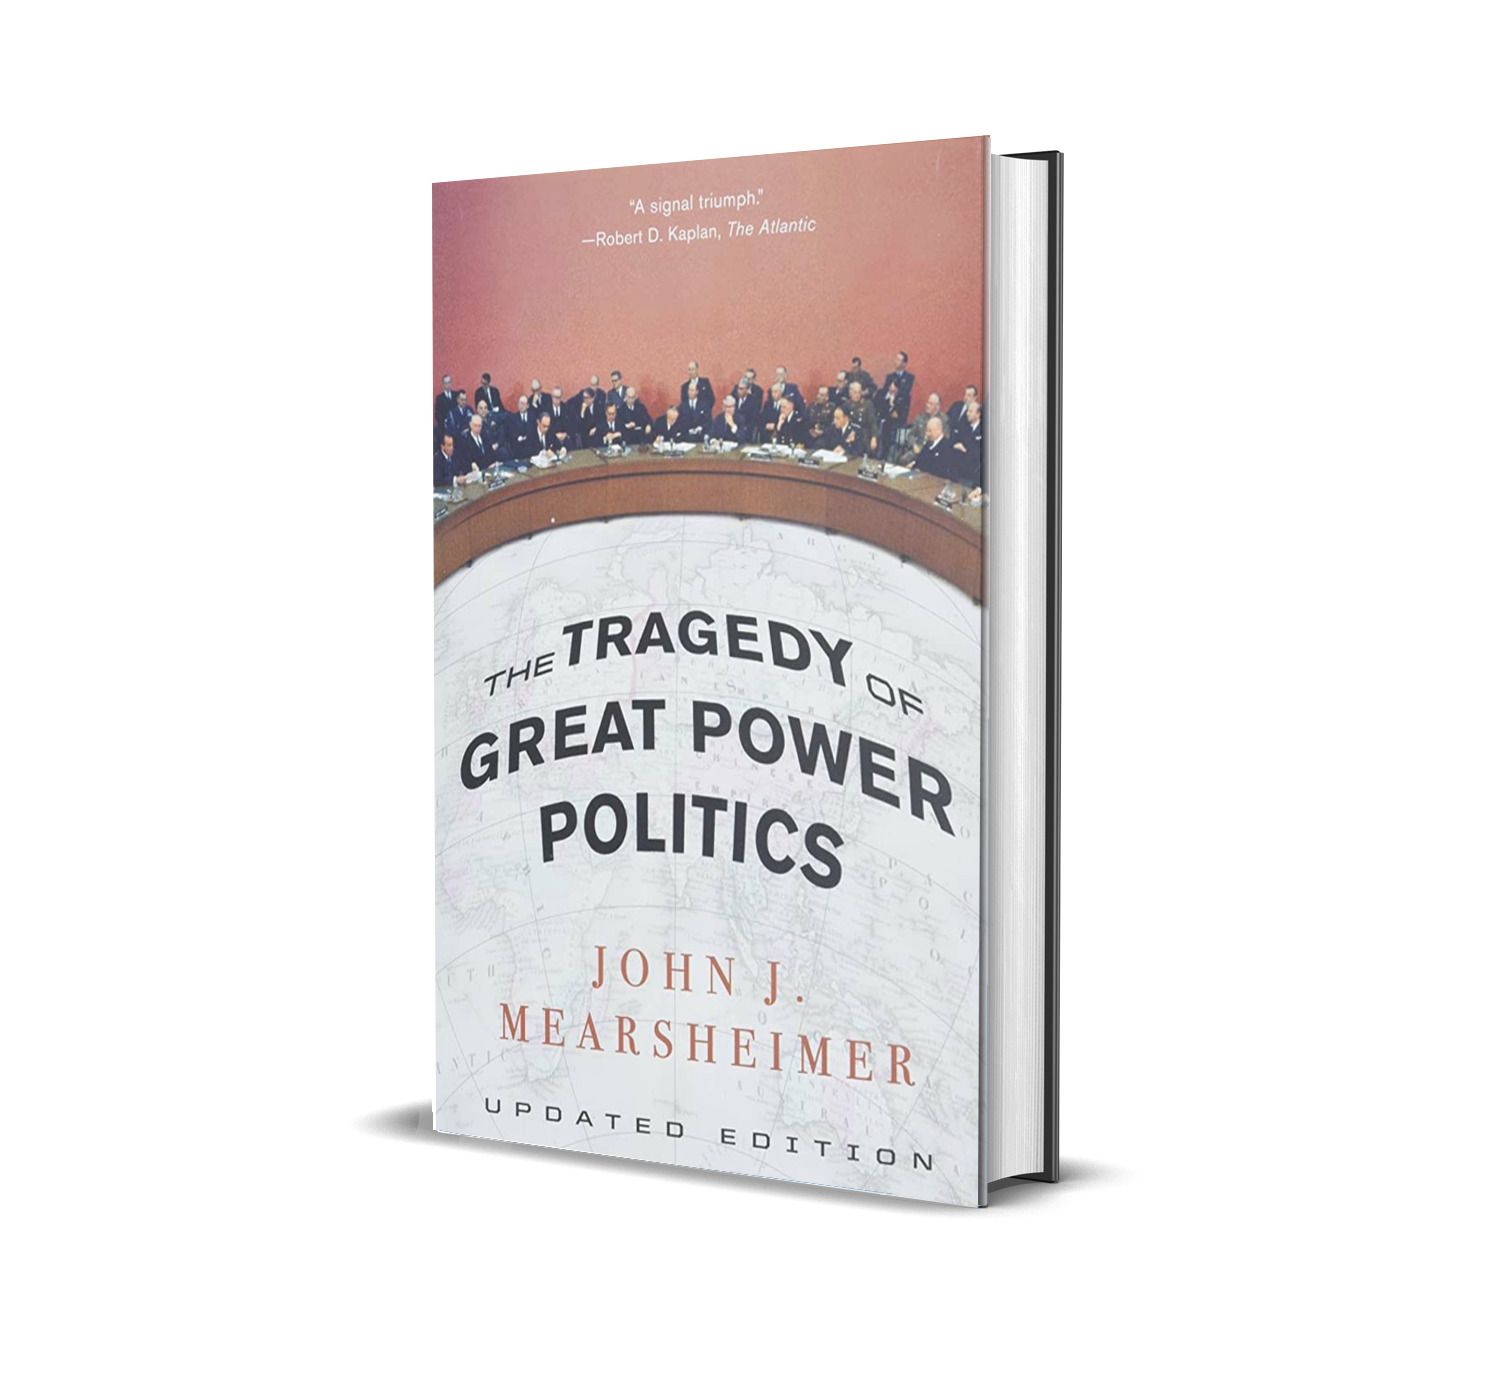 The Tragedy of Great Power Politics by John Mearsheimer